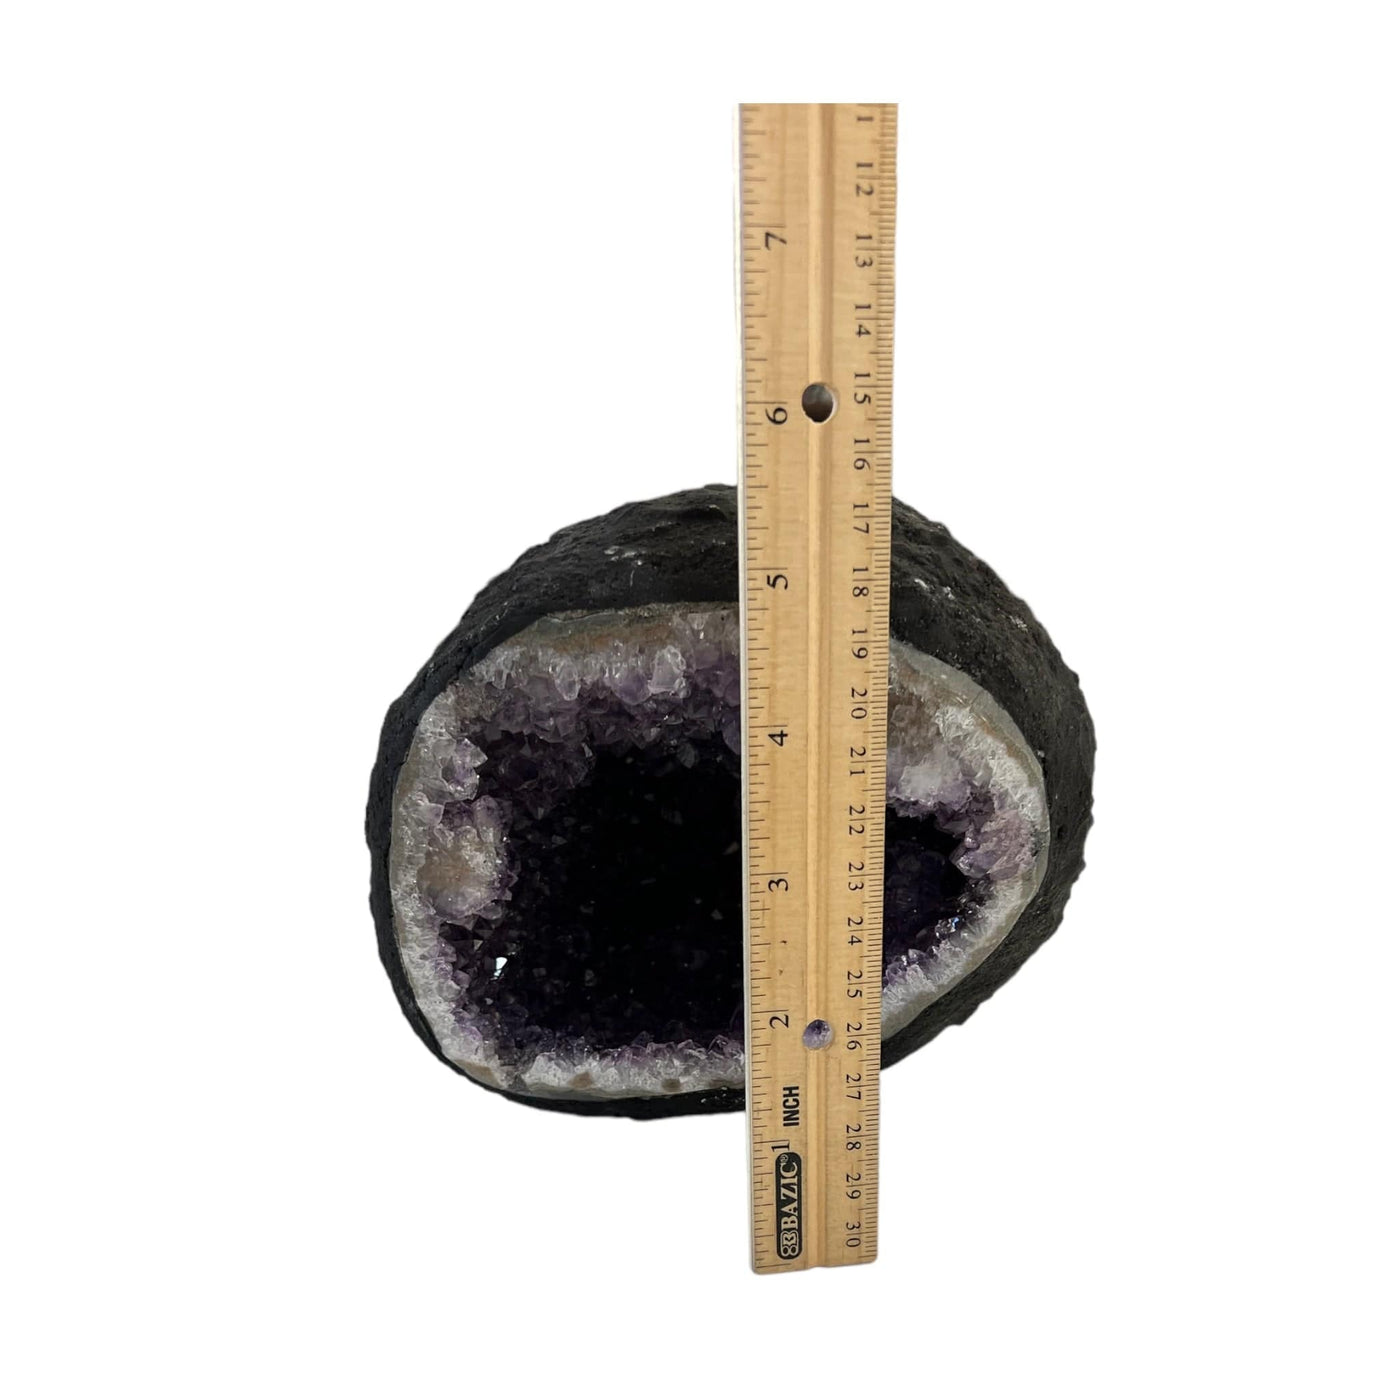 Round amethyst geode on a white background with a ruler showing it is around 5" tall.